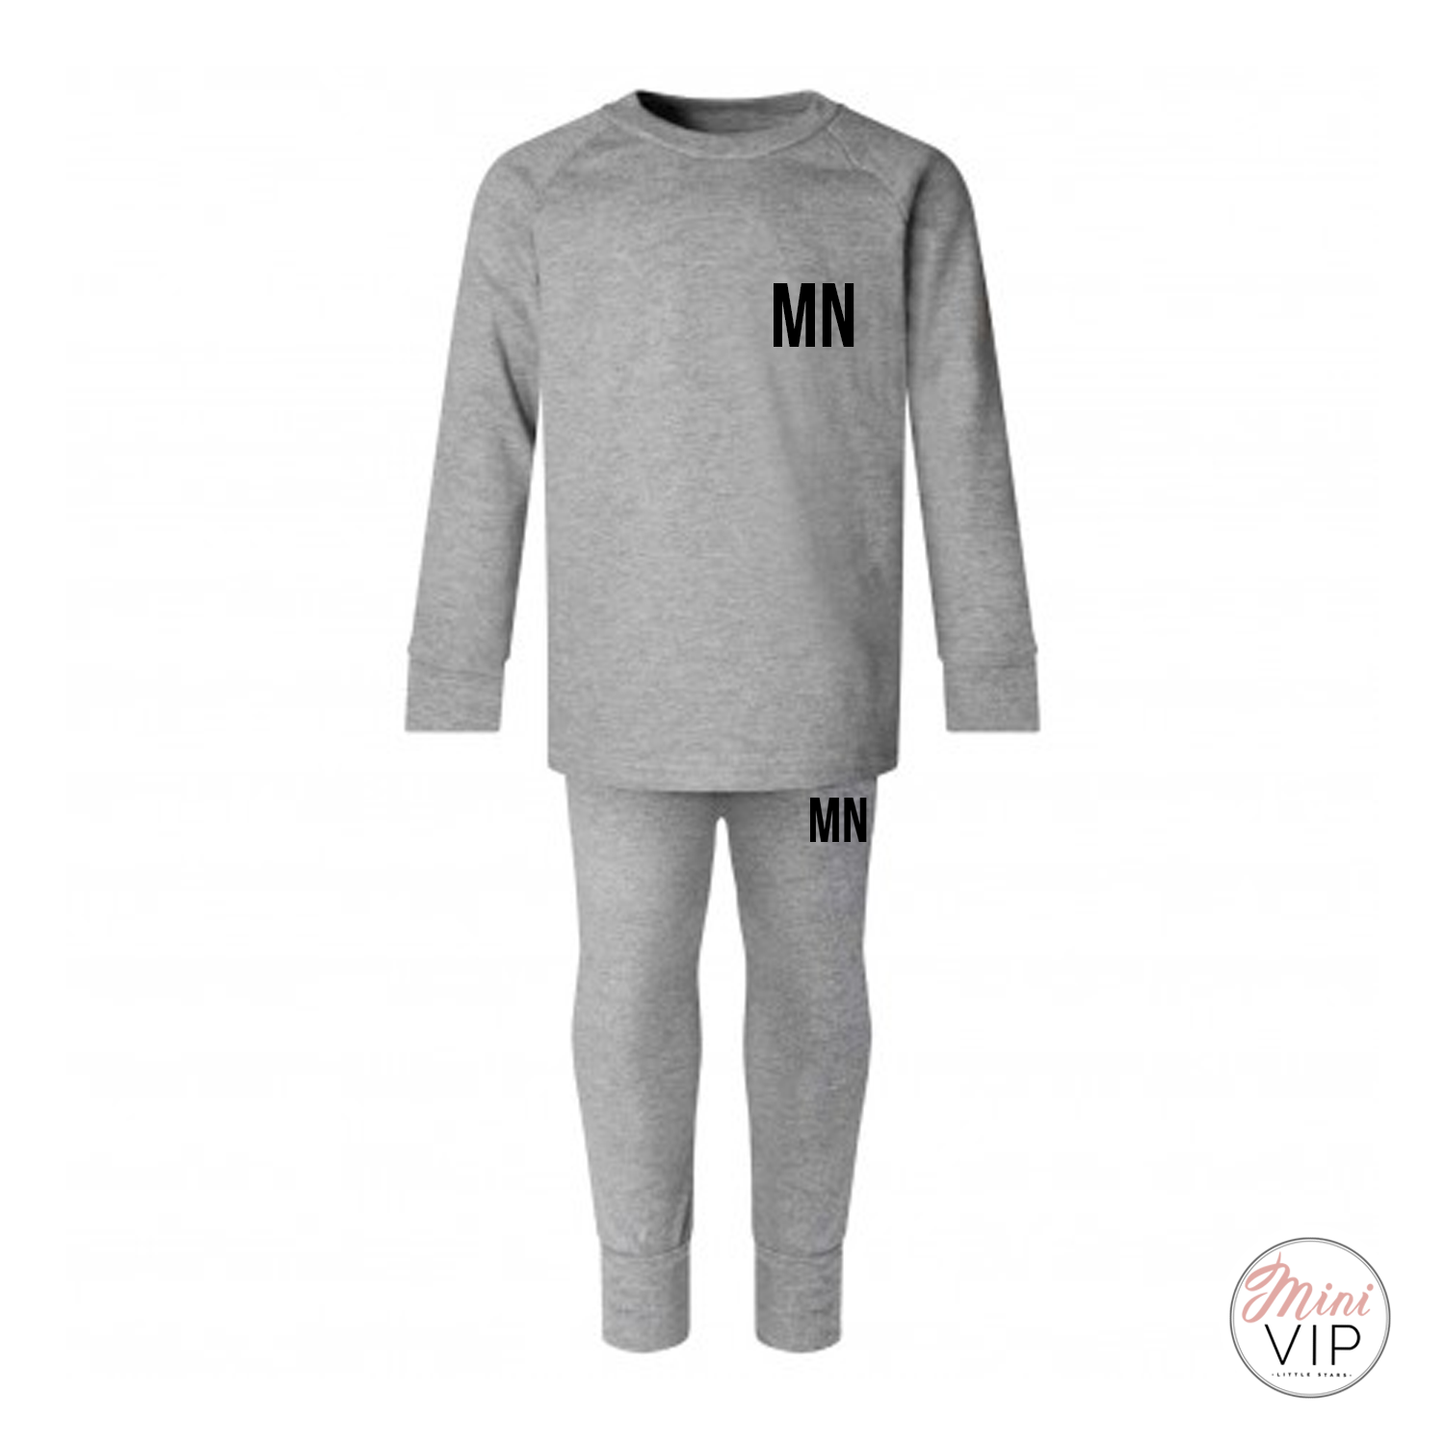 Personalise your own Grey Cotton Lounge Suit